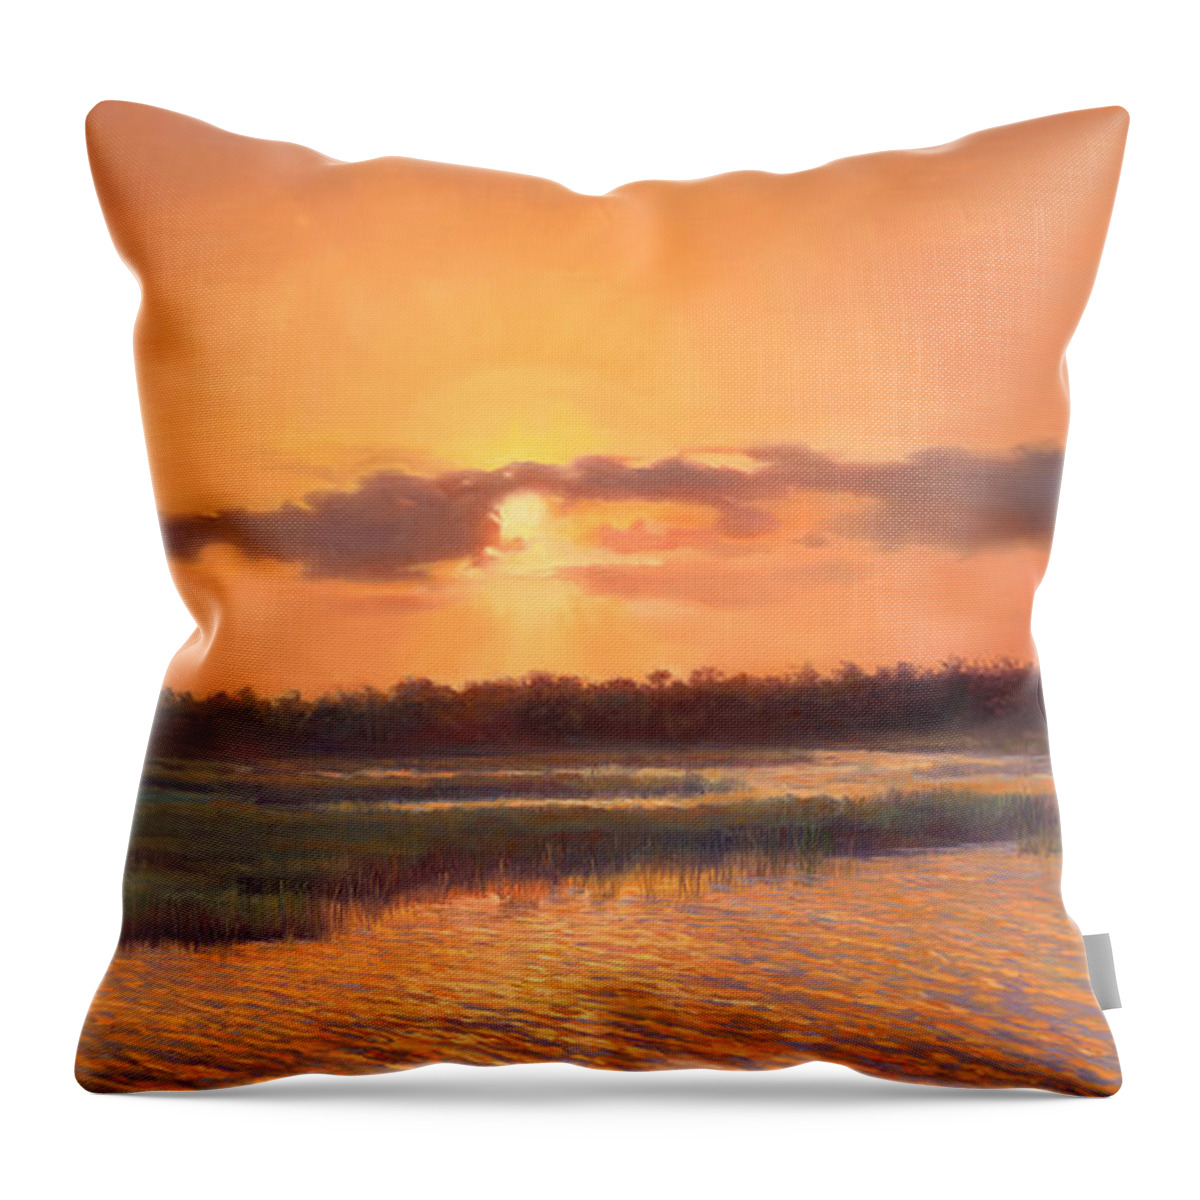 Panoramic Landscape Throw Pillow featuring the painting Pine Glades Sunset by Laurie Snow Hein